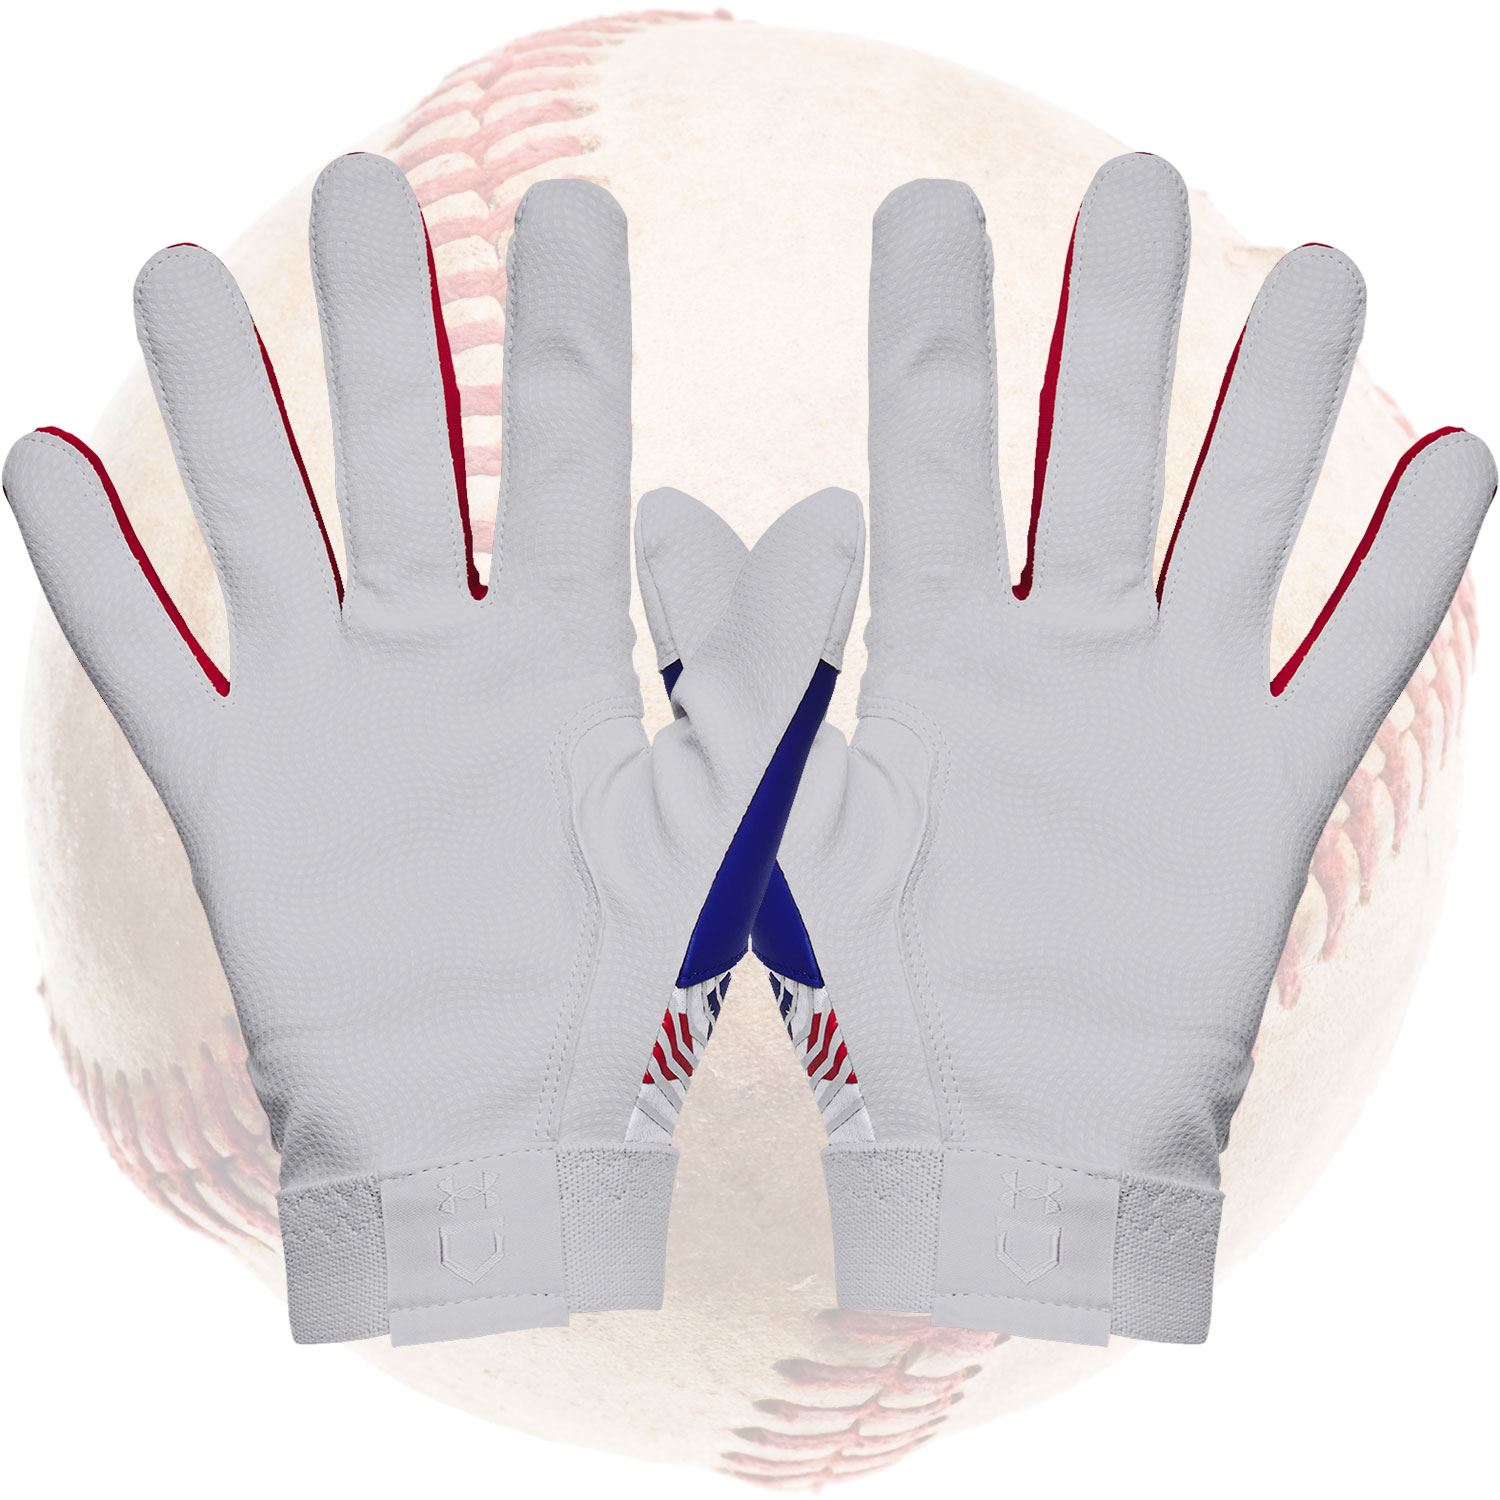 Under Armour Clean Up Culture USA Baseball Kids Batting Gloves - Performance Synthetic Grip